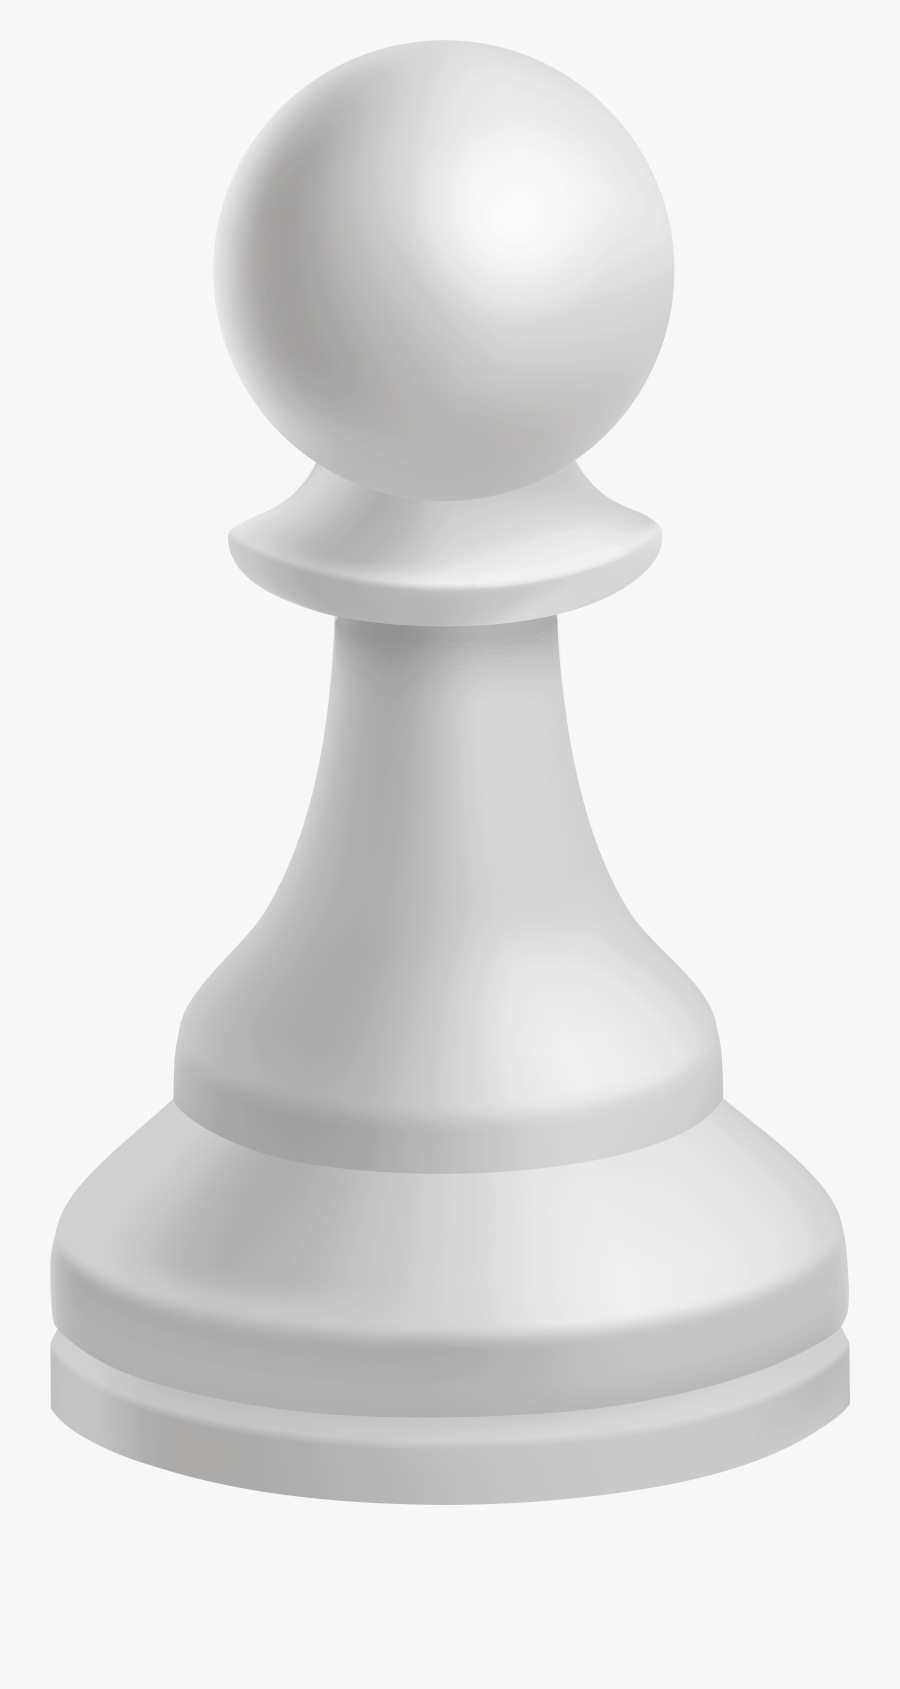 Pawn White Chess Piece Png Clip Art - Chess Pieces Pawn White, Transparent Clipart